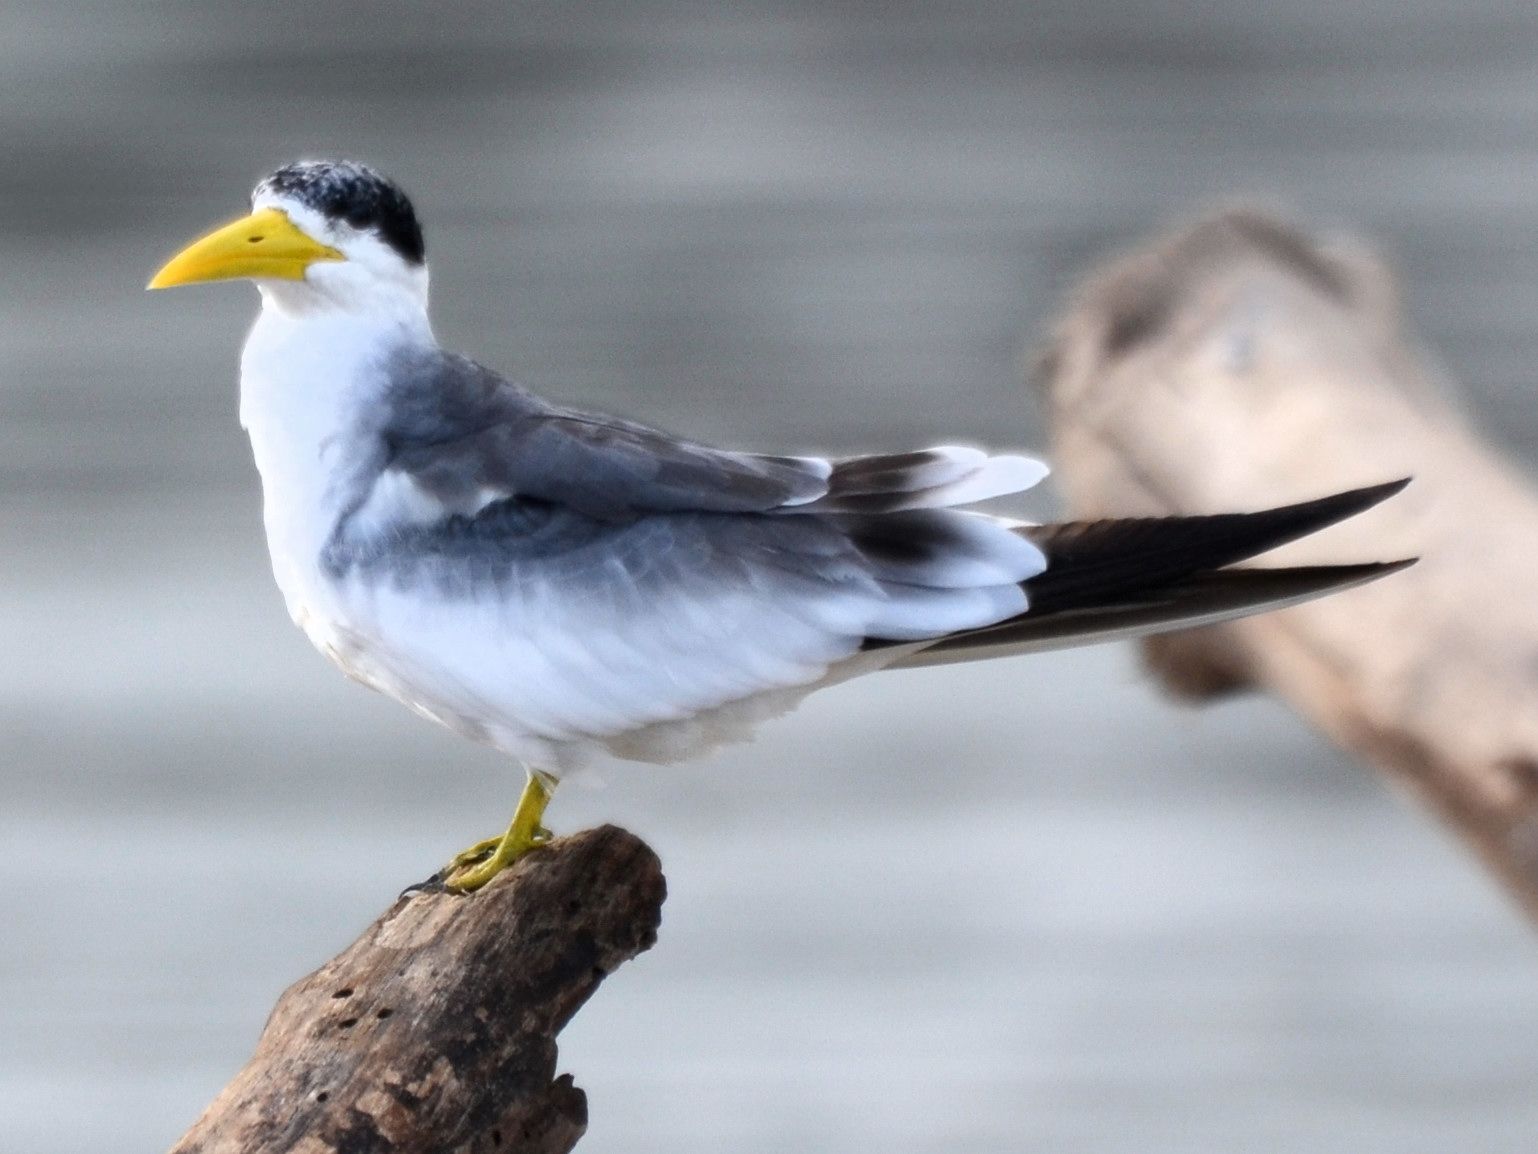 Click picture to see more Large-billed Terns.